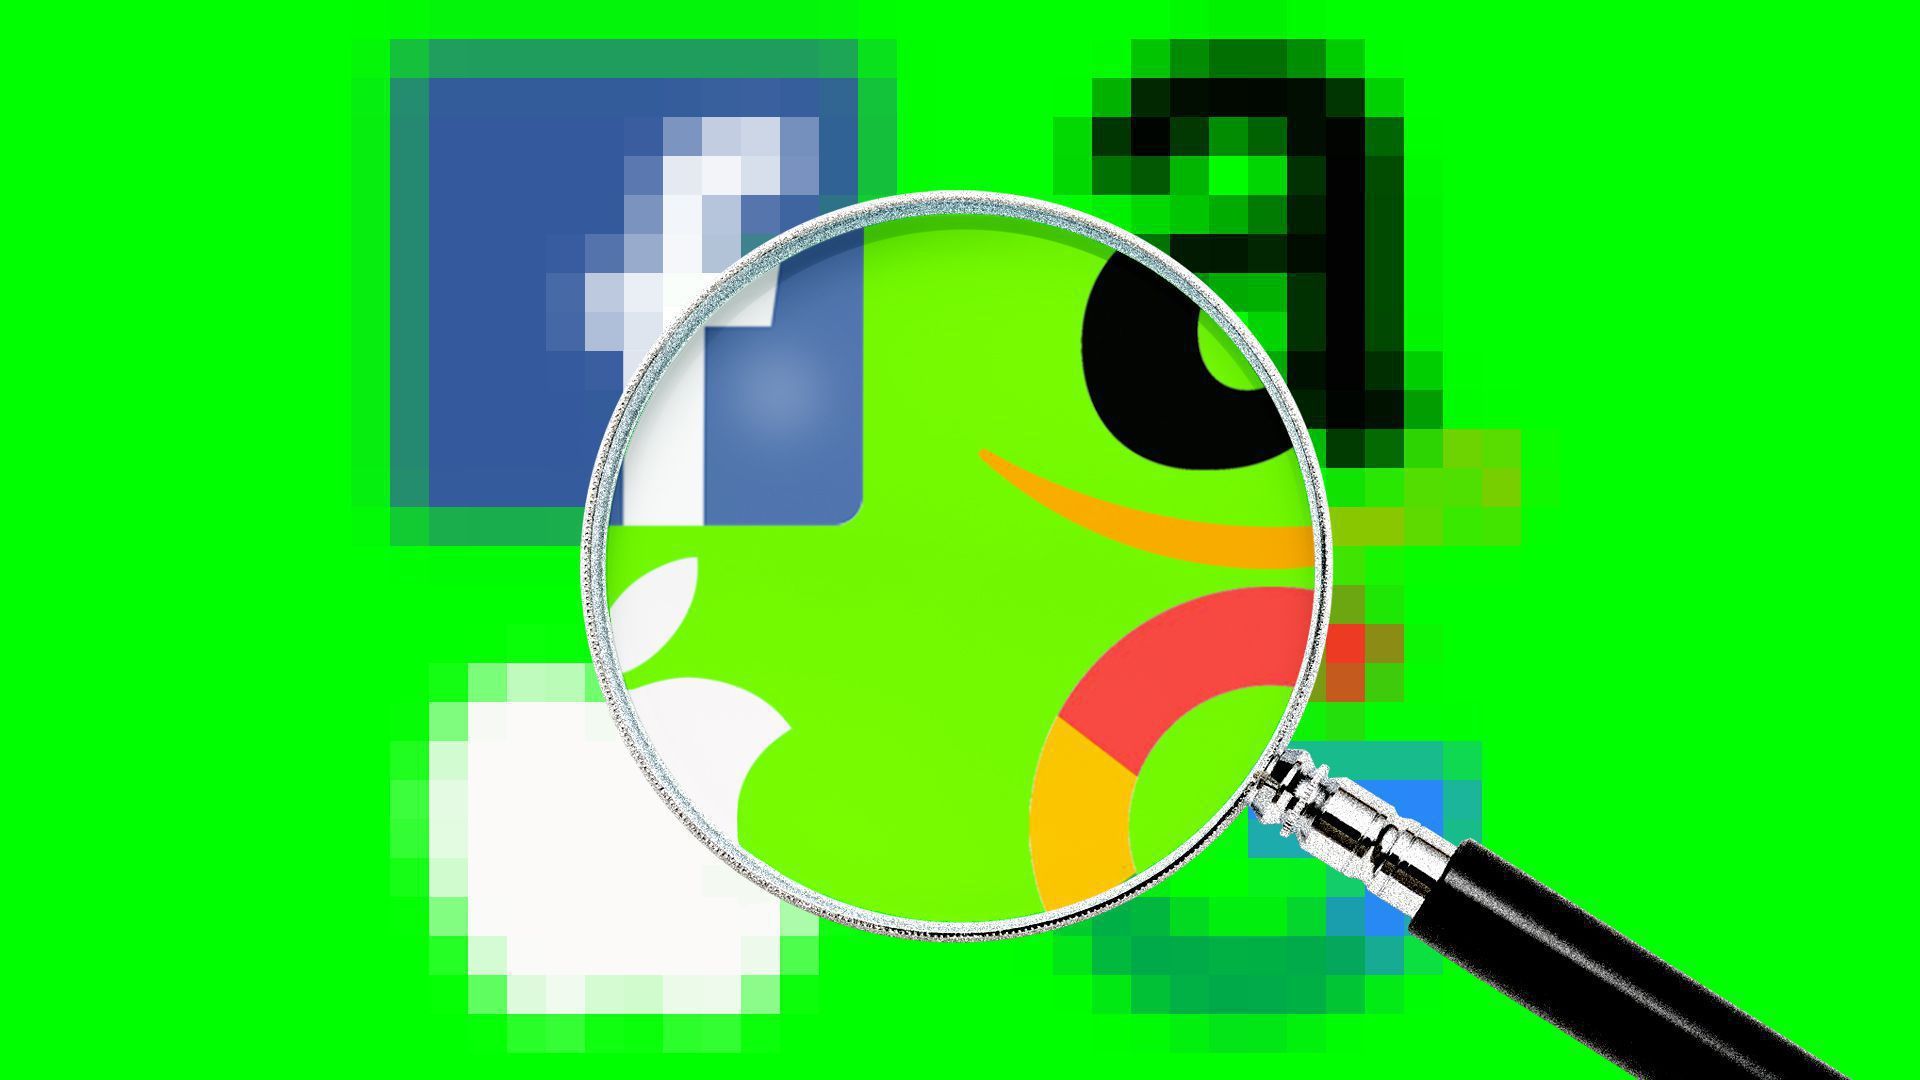 Big Tech logos with a magnifying glass